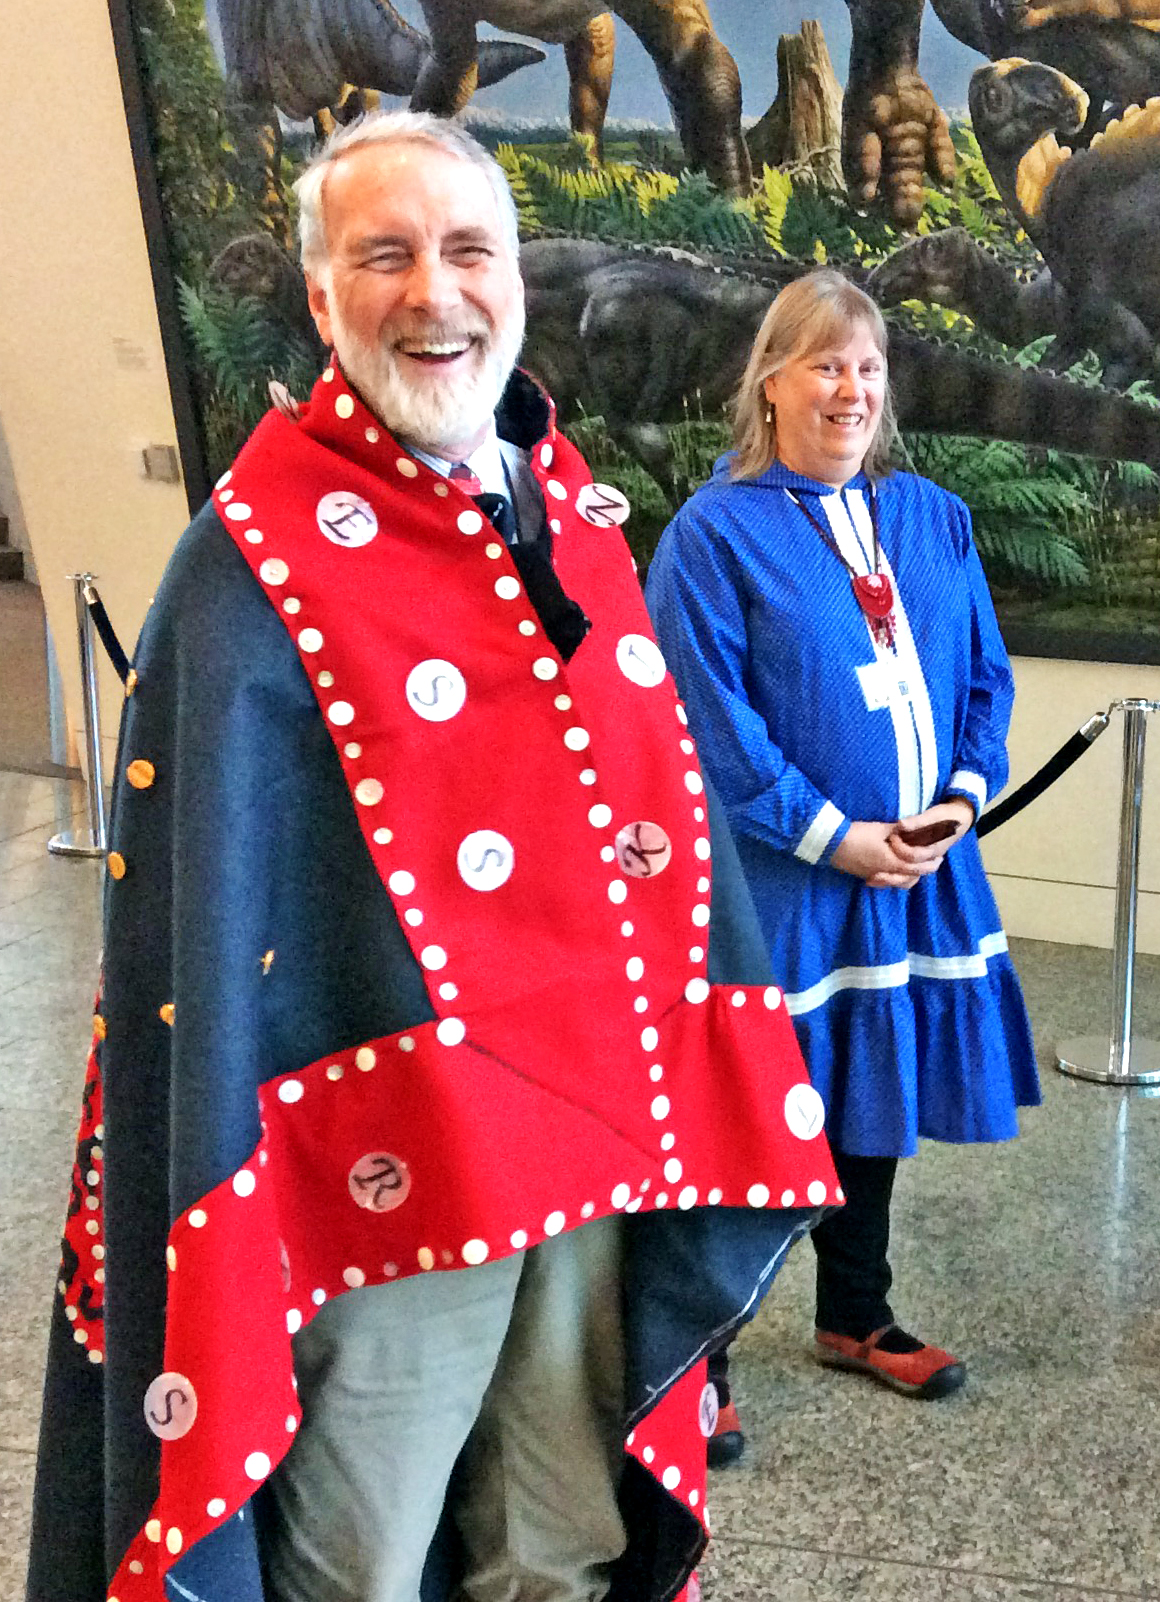 UAMN photo. UA Museum of the North docents Tim Doran and Tish Perkins wait to greet students for a directed discovery tour.